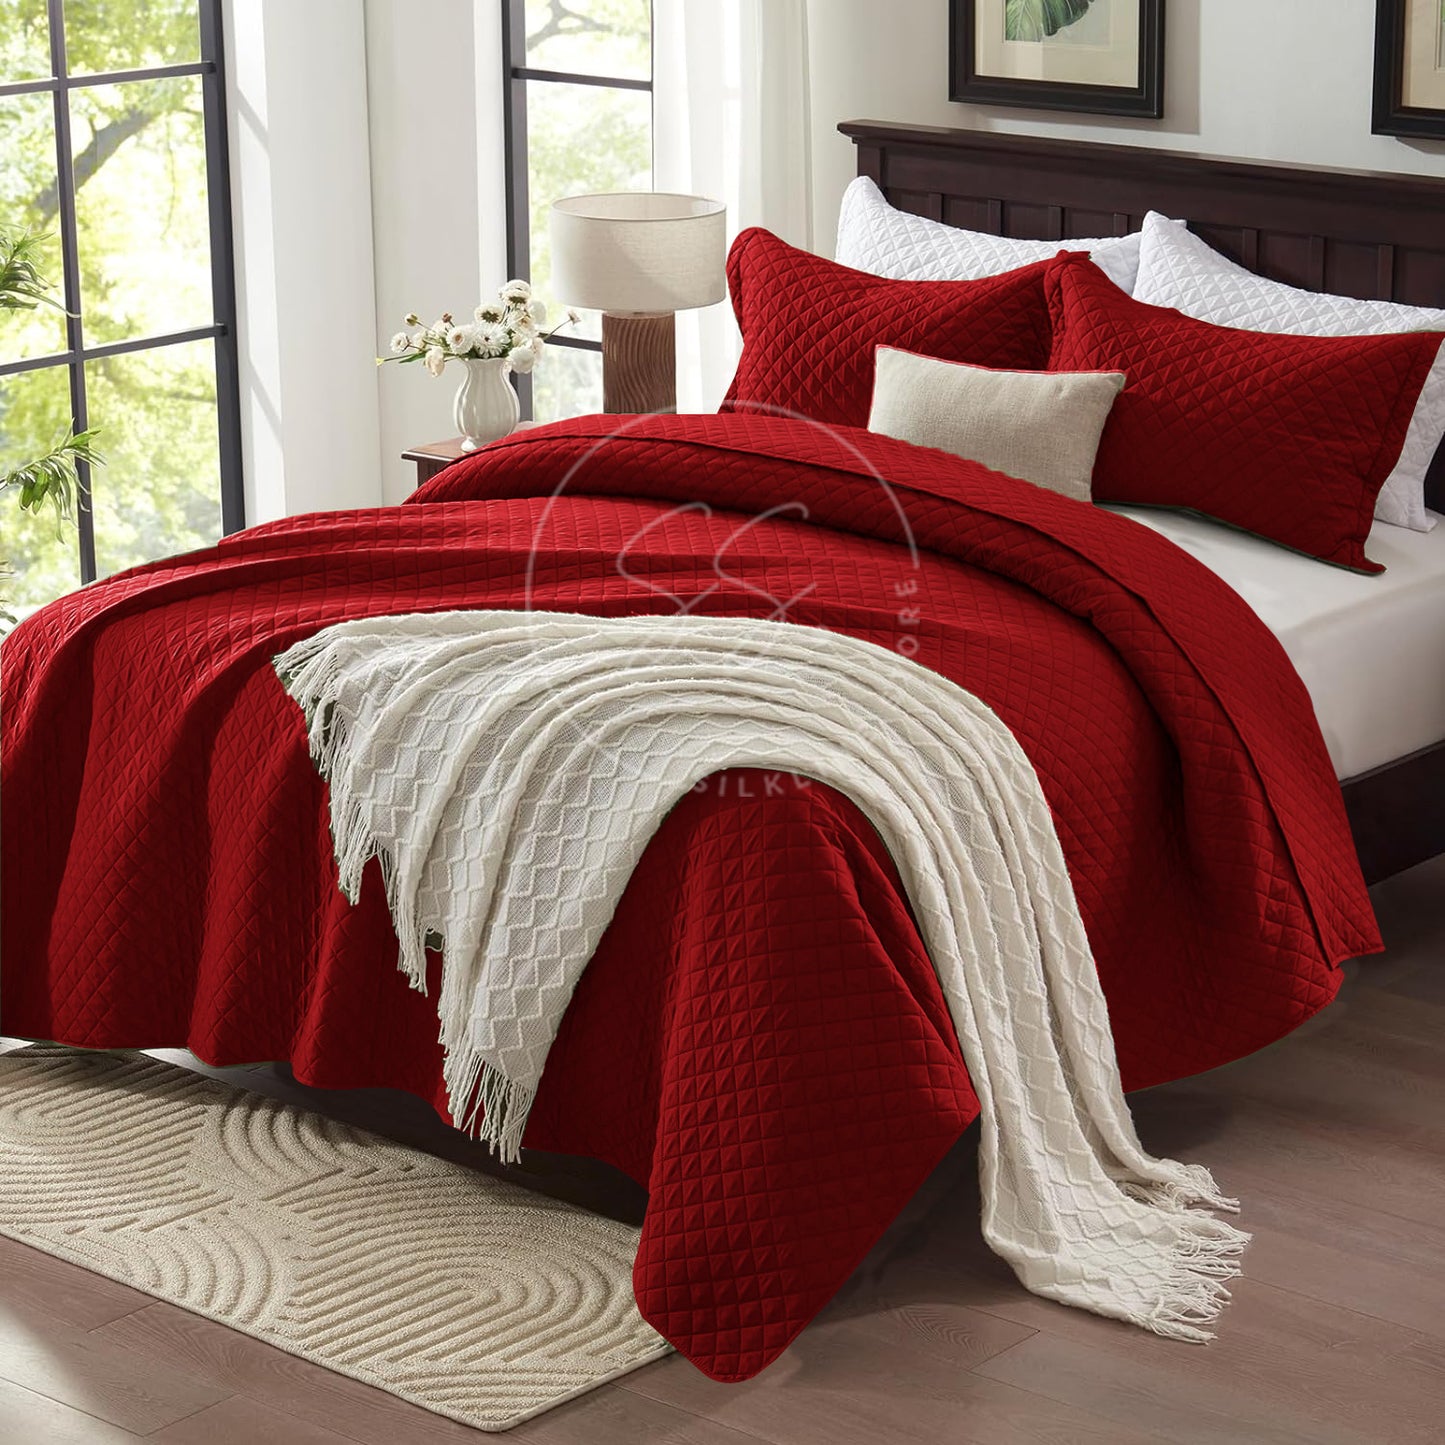 Maroon - king Size Microfibre: 3 pcs Quilted bedspread set